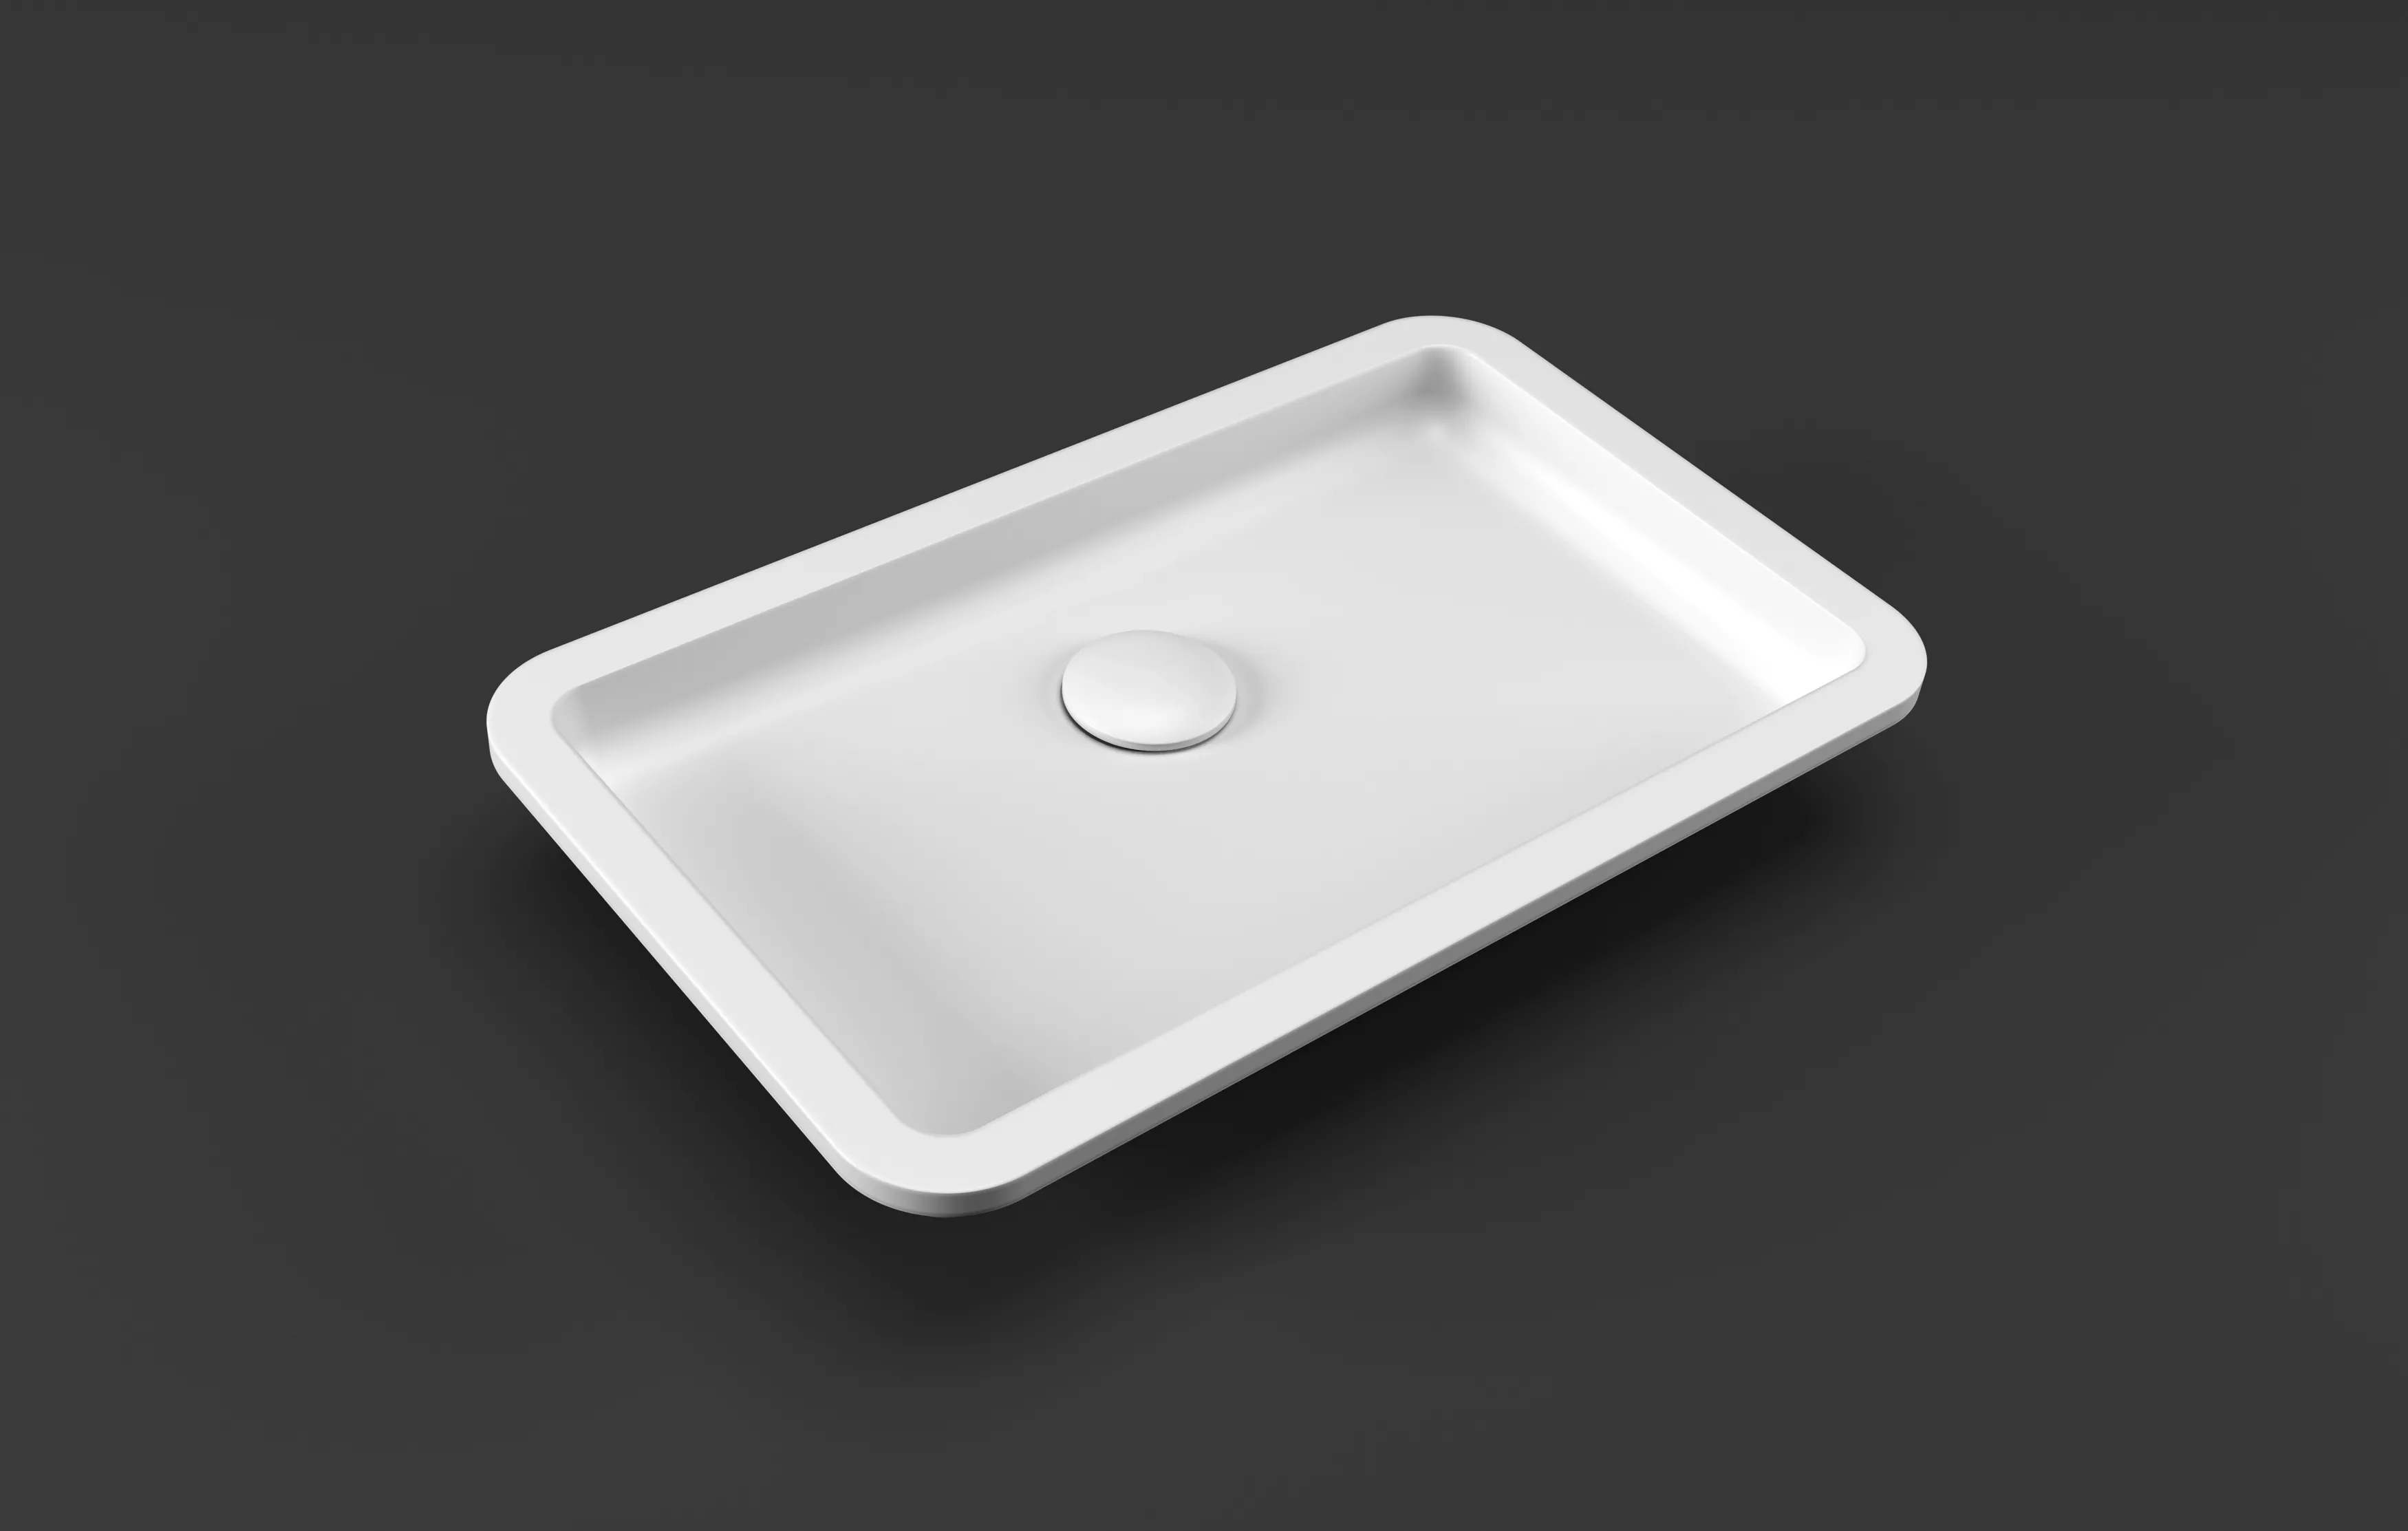 HIMACS launches 5 new basins, blending aesthetics with inclusivity for all abilities